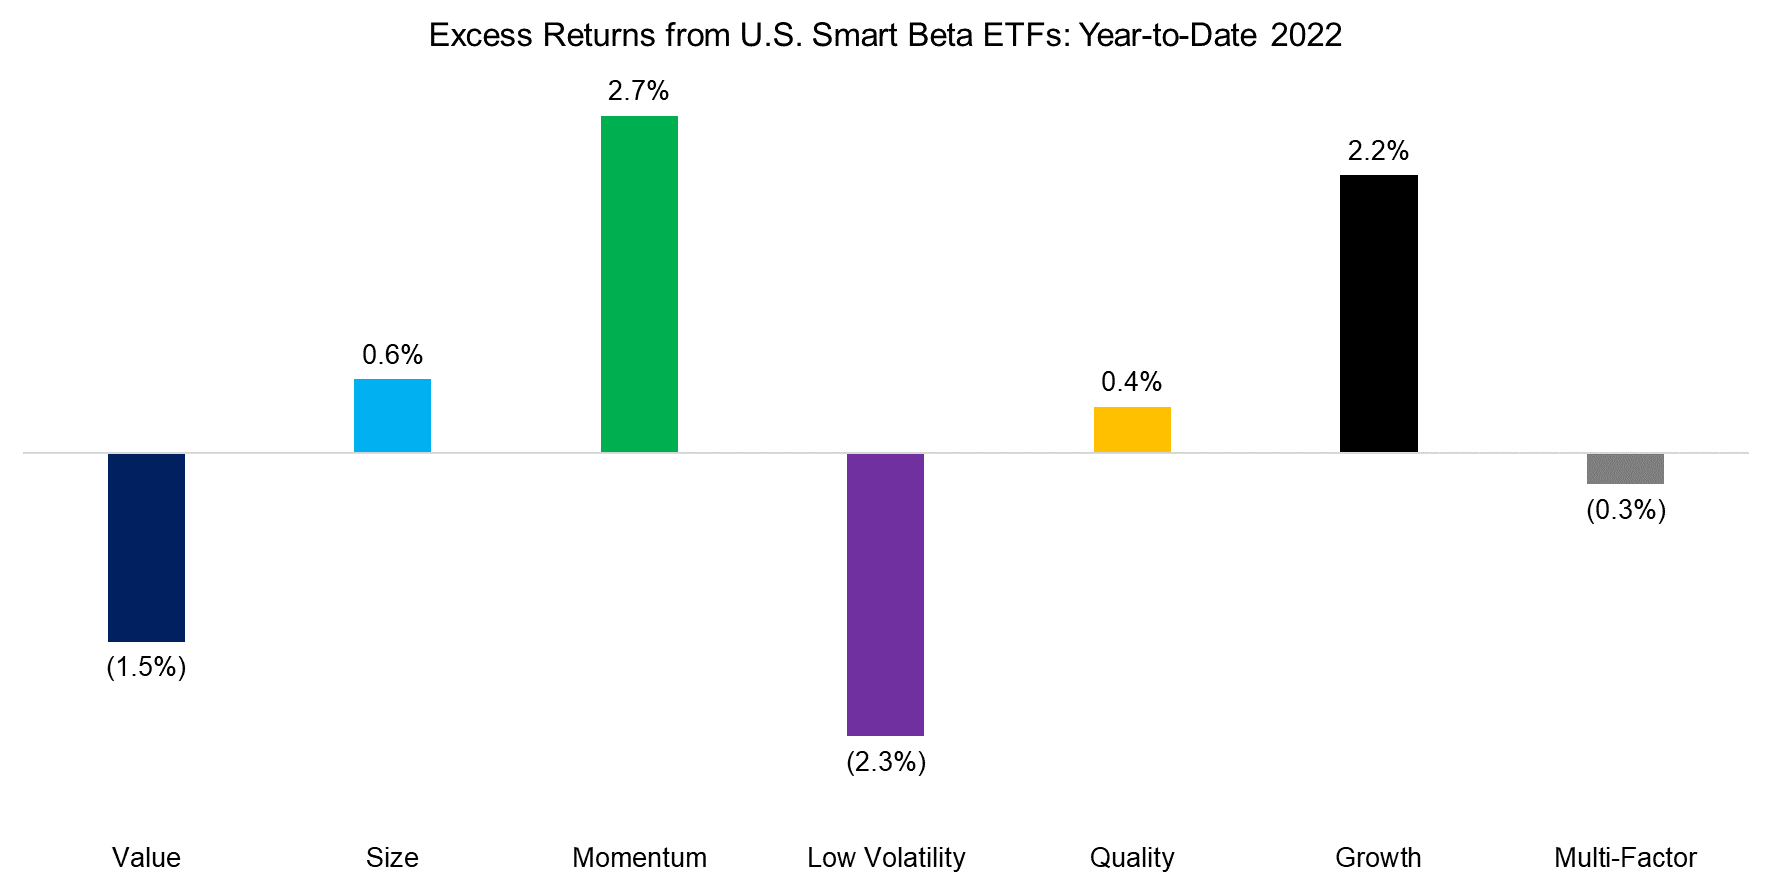 Excess Returns from U.S. Smart Beta ETFs Year-to-Date 2022